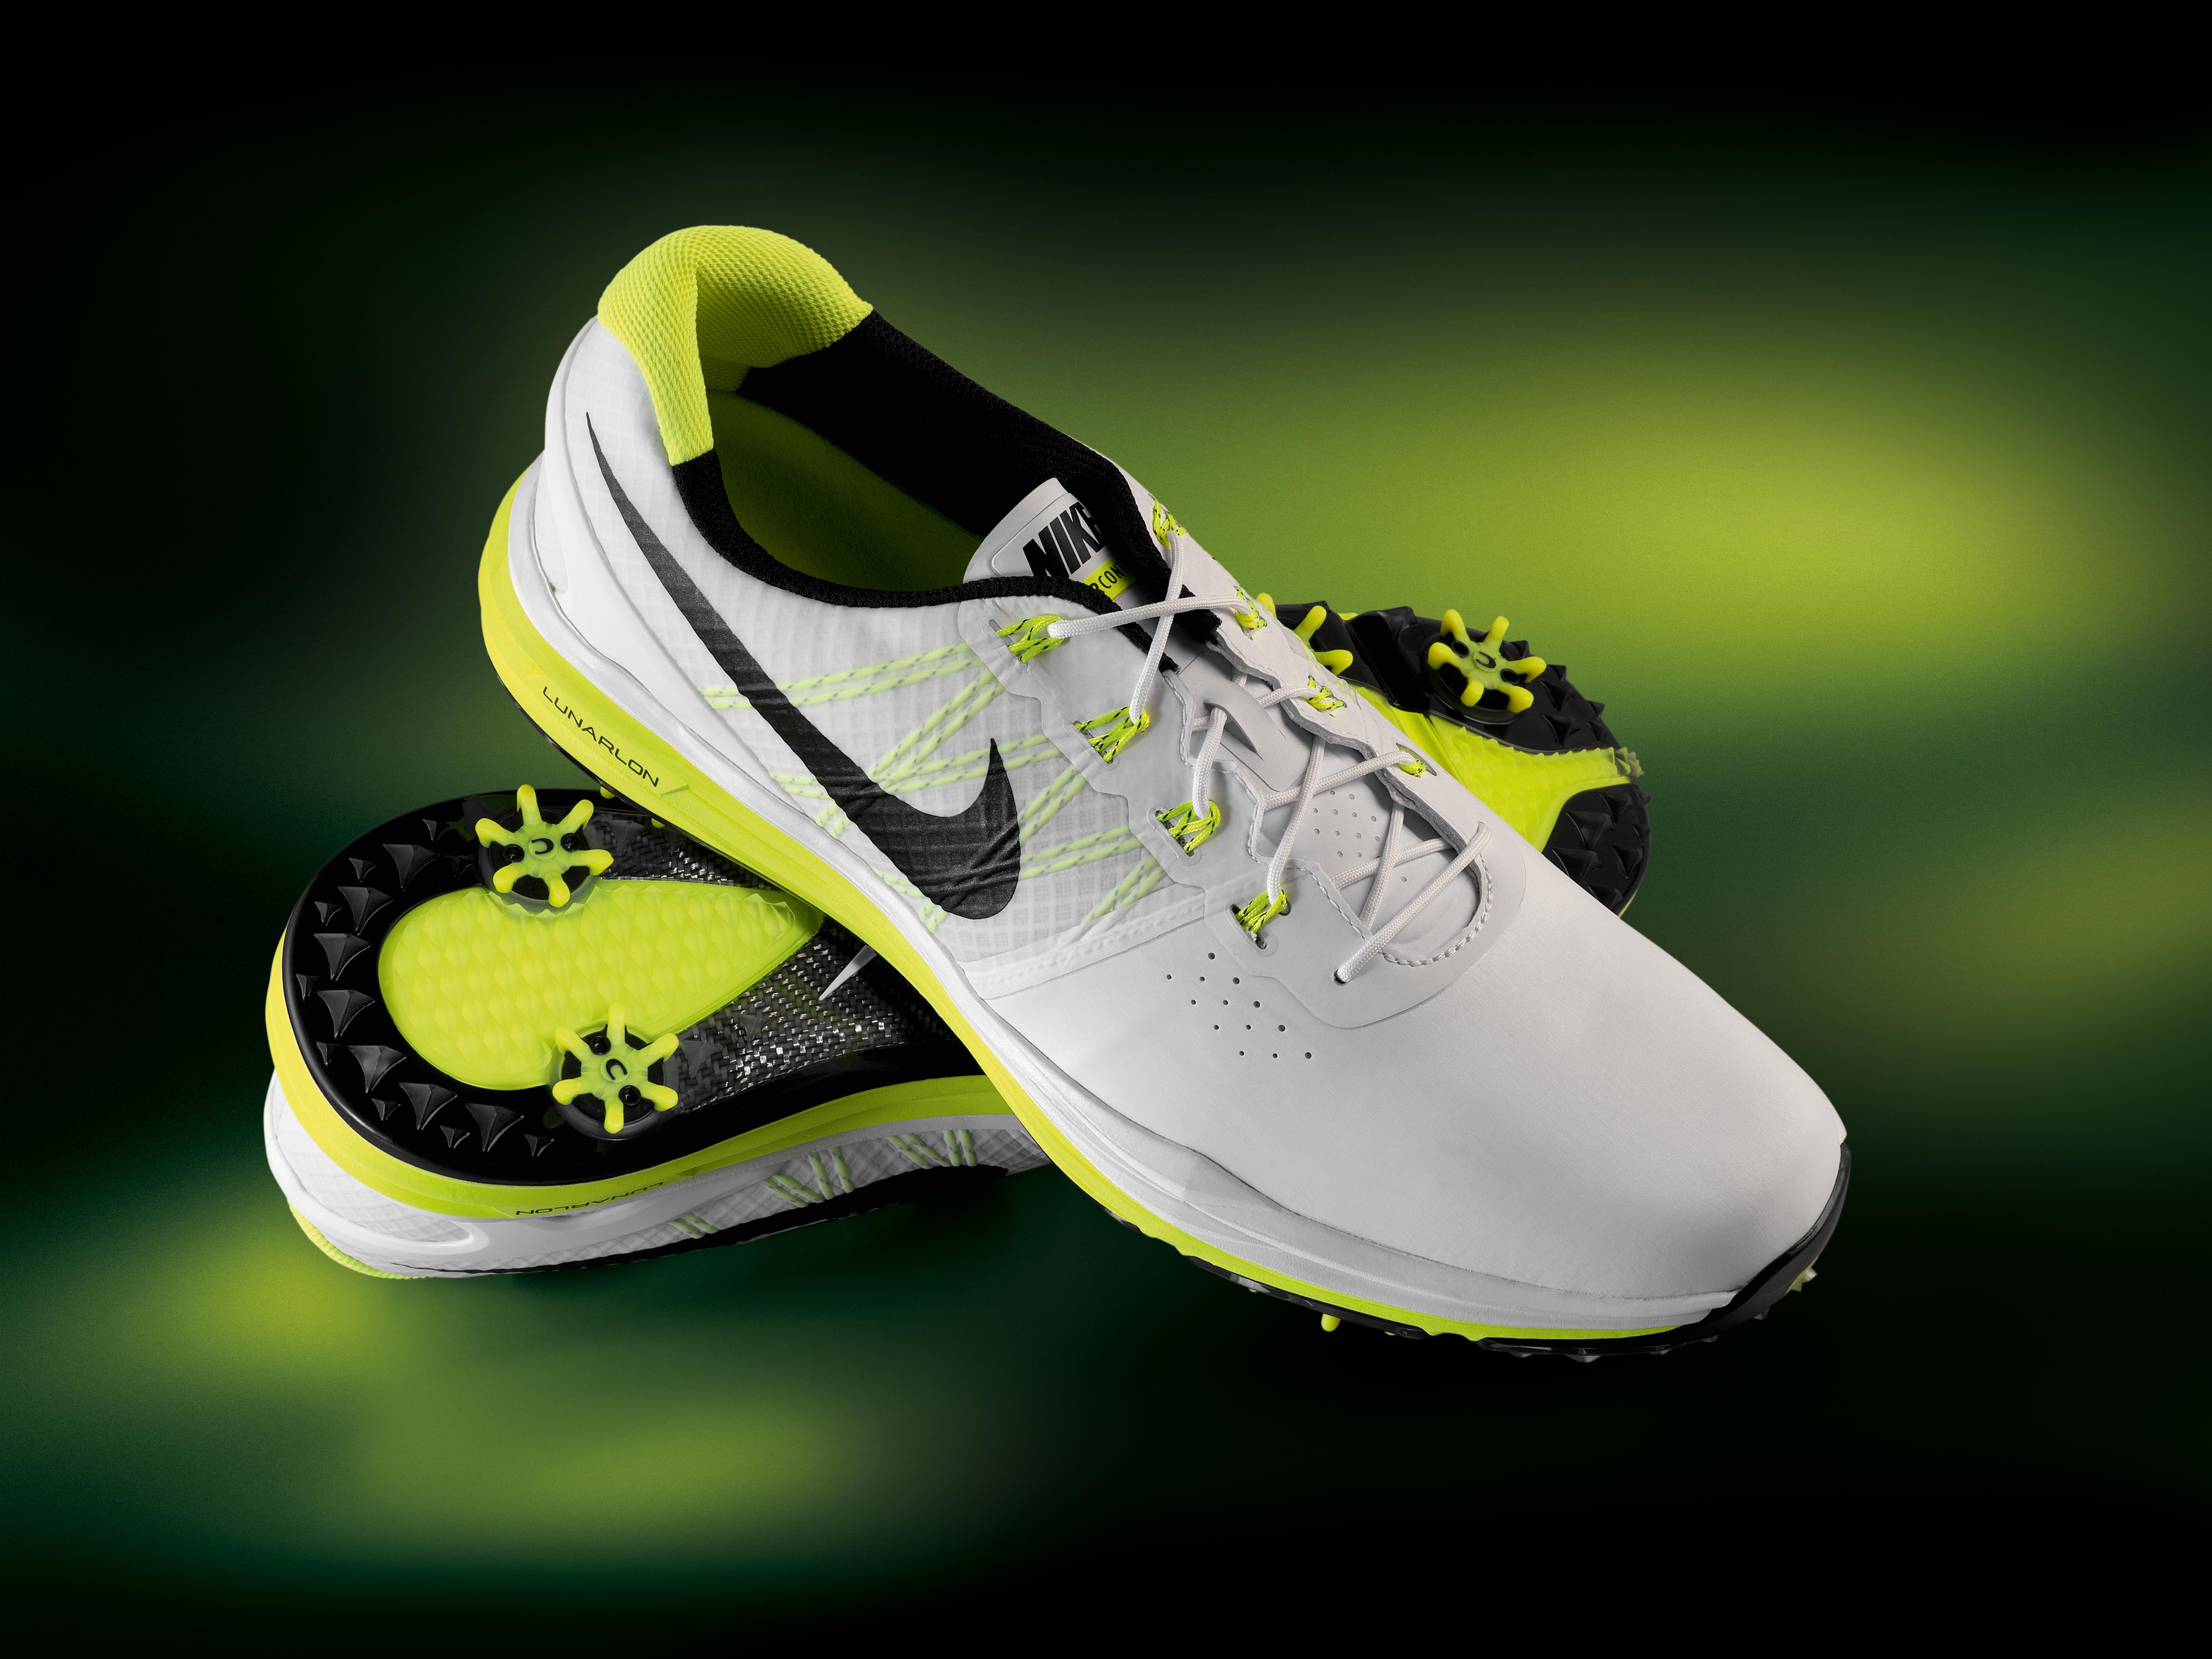 Nike Lunar 3 shoe review | Golf Monthly